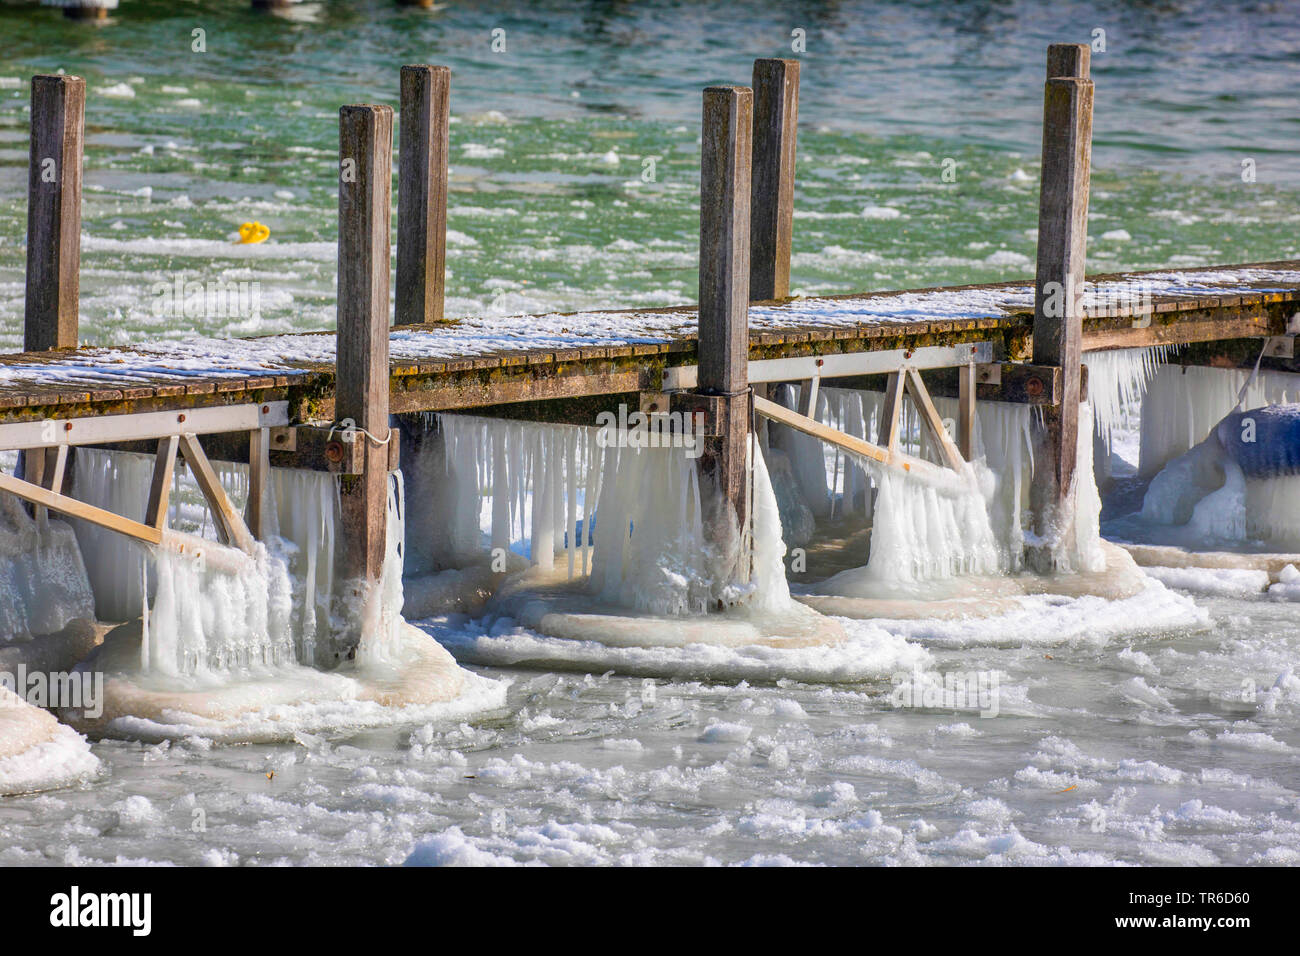 weirdly shaped icing on a bathing jetty after winter storm, Germany, Bavaria, Lake Chiemsee Stock Photo